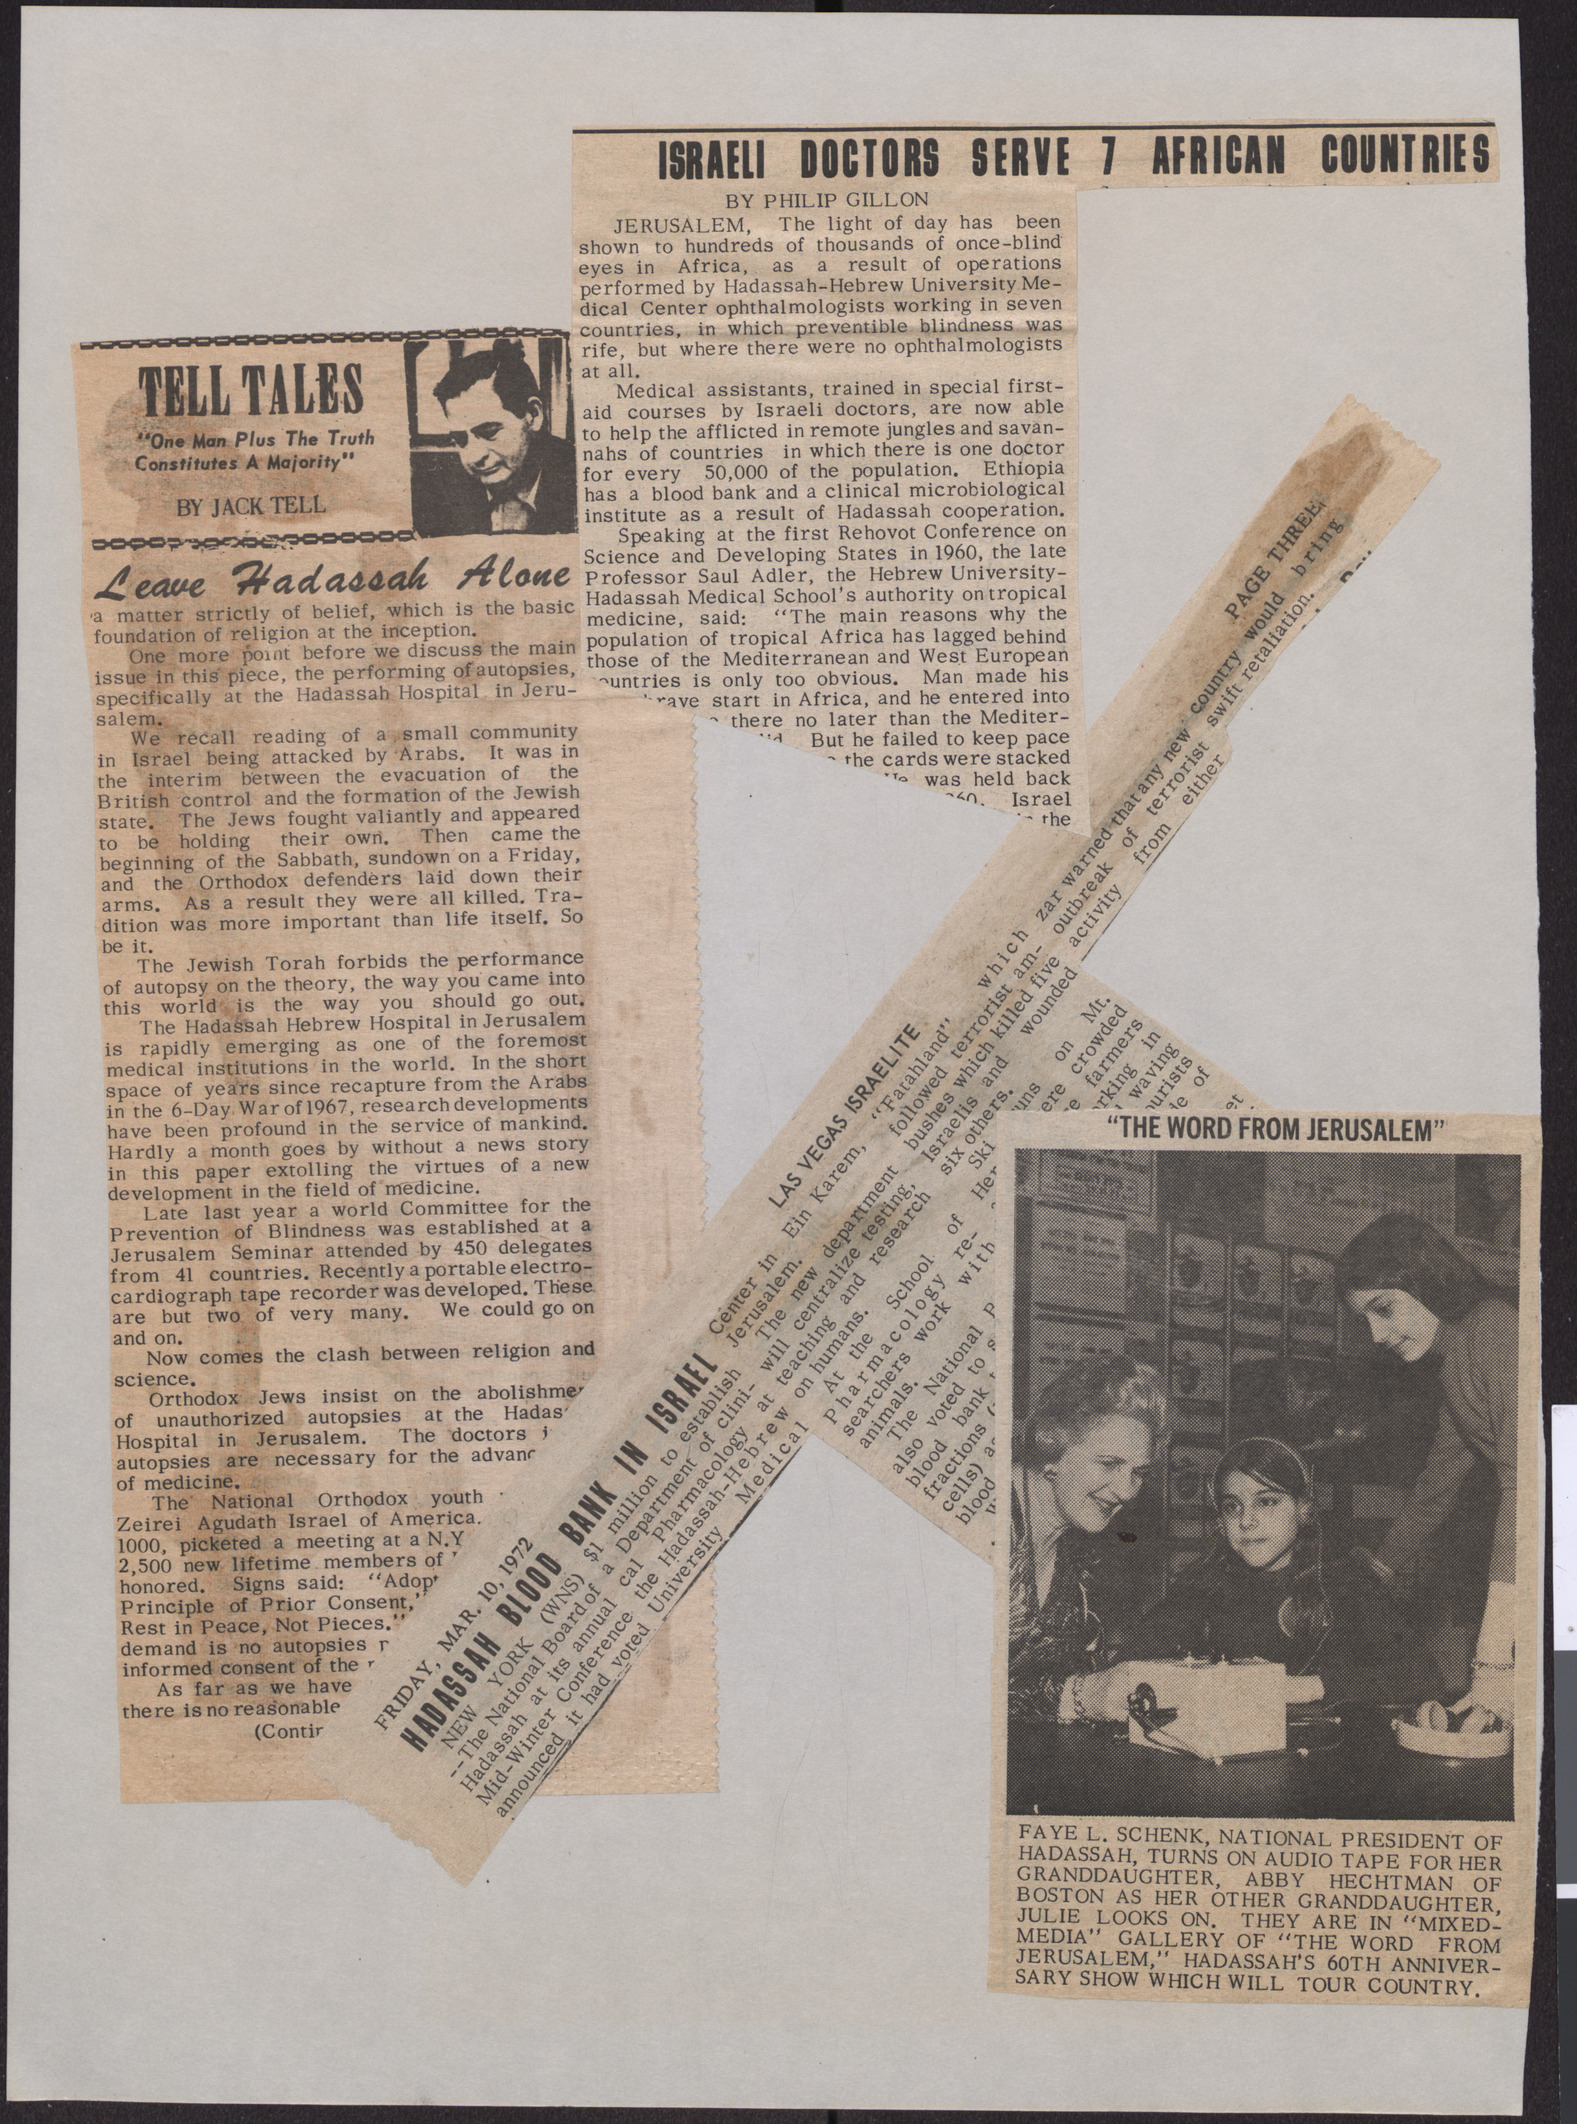 Newspaper clippings about Hadassah programs in Israel, 1971-1972